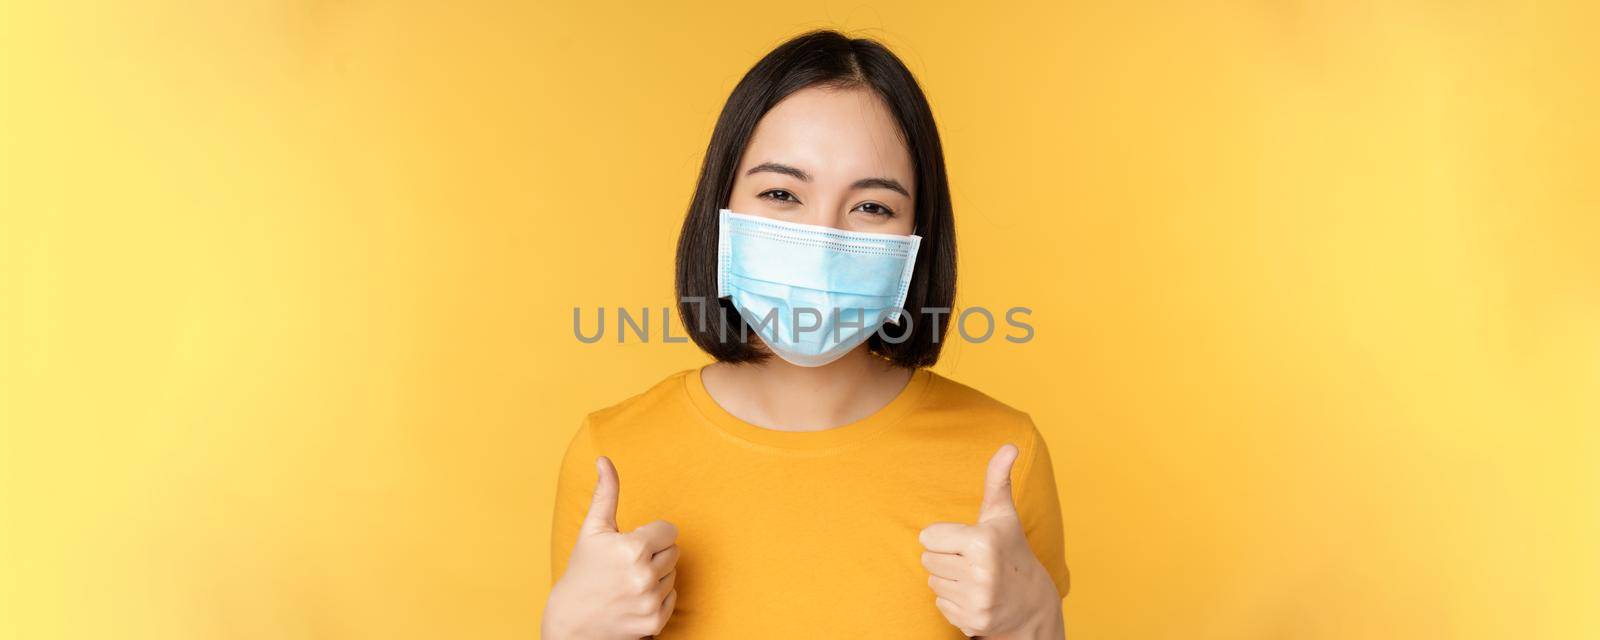 Cheerful korean woman in medical face mask, support people during pandemic, wear personal protective equipment from covid-19, showing thumbs up in approval, yellow background.